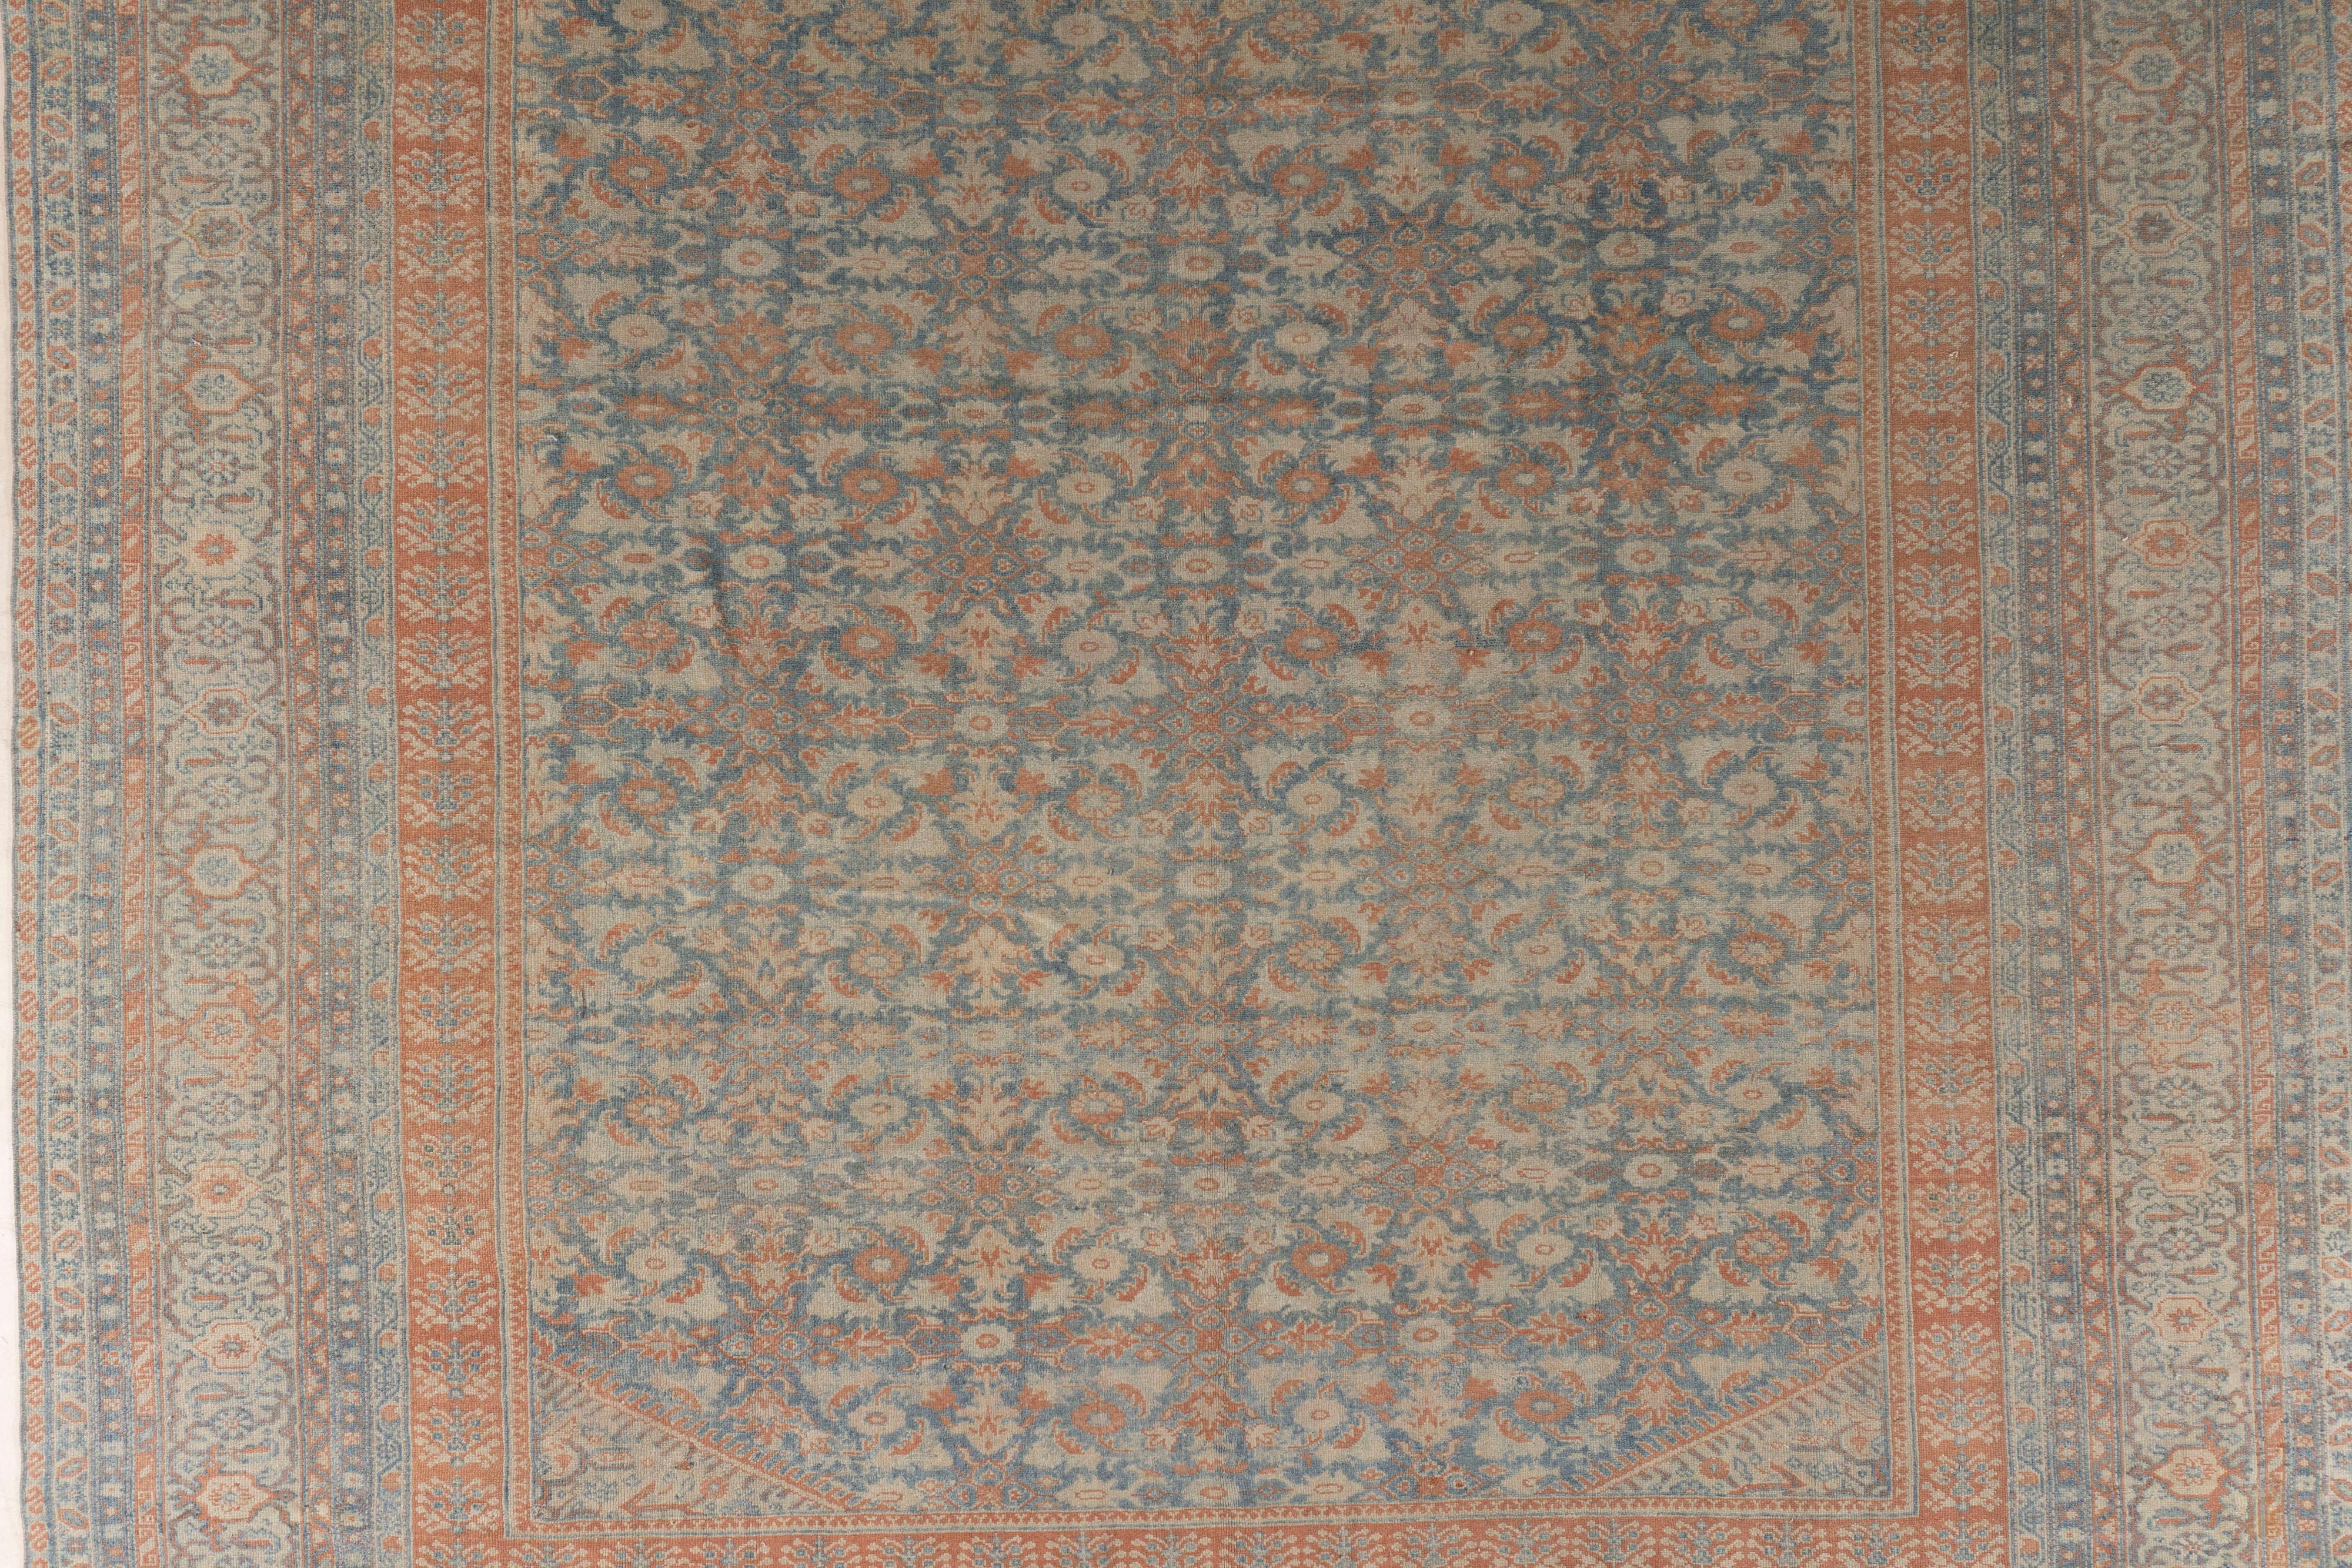 Vintage Persian Bibikabad rug measures 10'6 X 13'. Bibikabad rugs & carpets are from western Iran near Hamadan and employ the Turkish knot and have designs similar to those of Malayer rugs, but often in larger sizes. In the earlier examples, camel